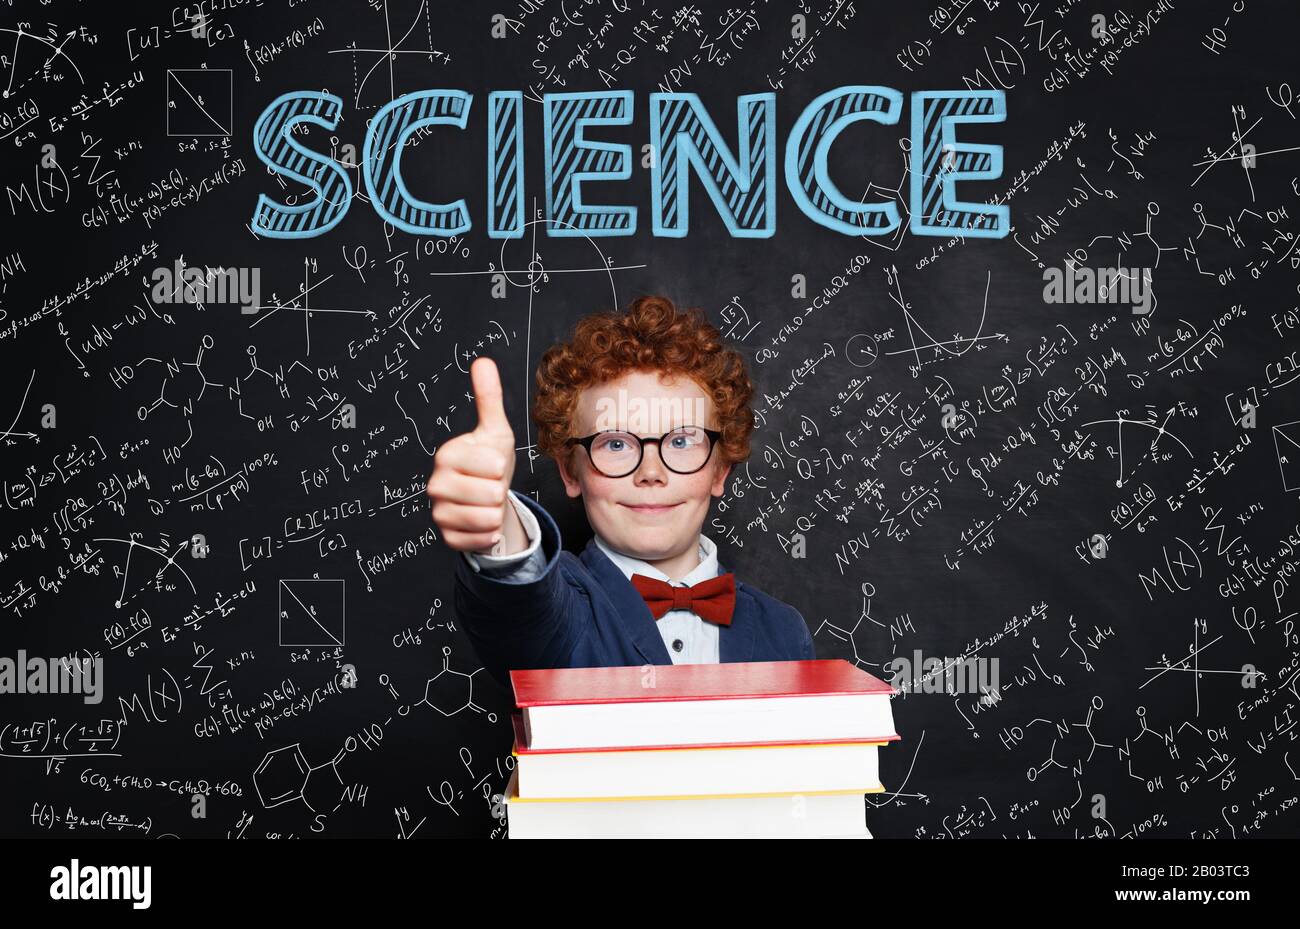 Successful smart kid wearing glasses and student uniform on science background Stock Photo